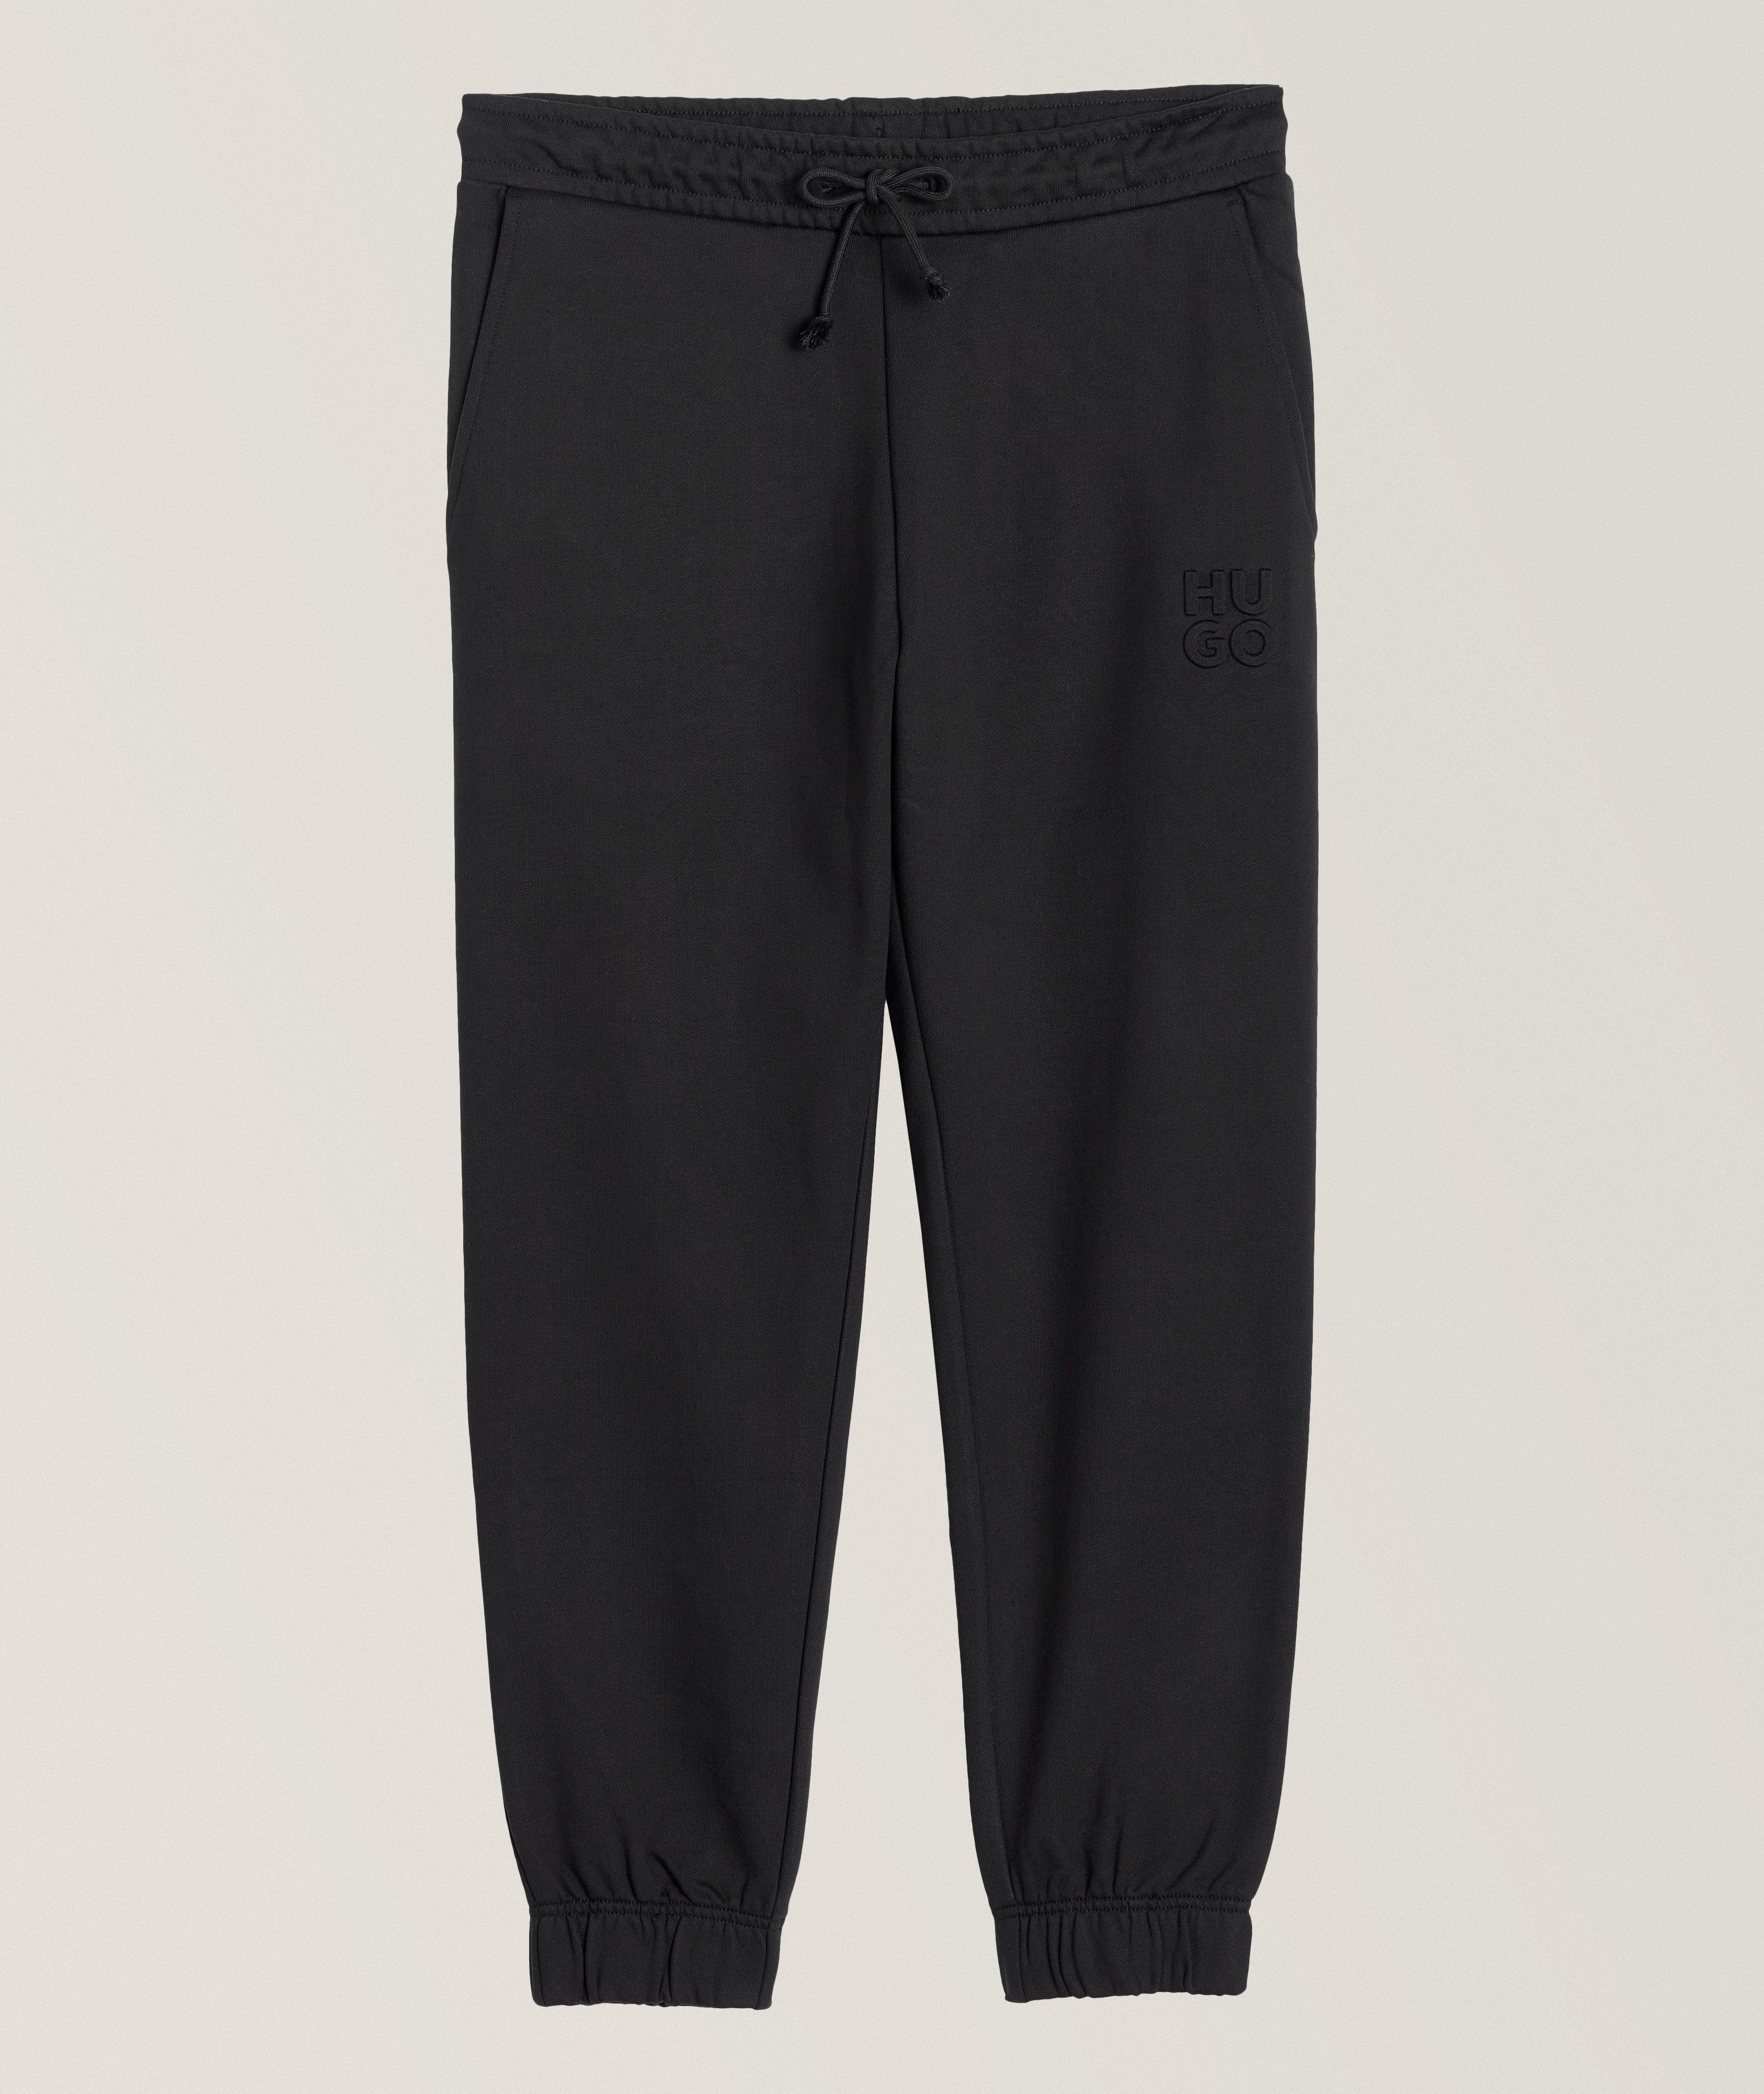 French Terry Cotton Trackpants image 0